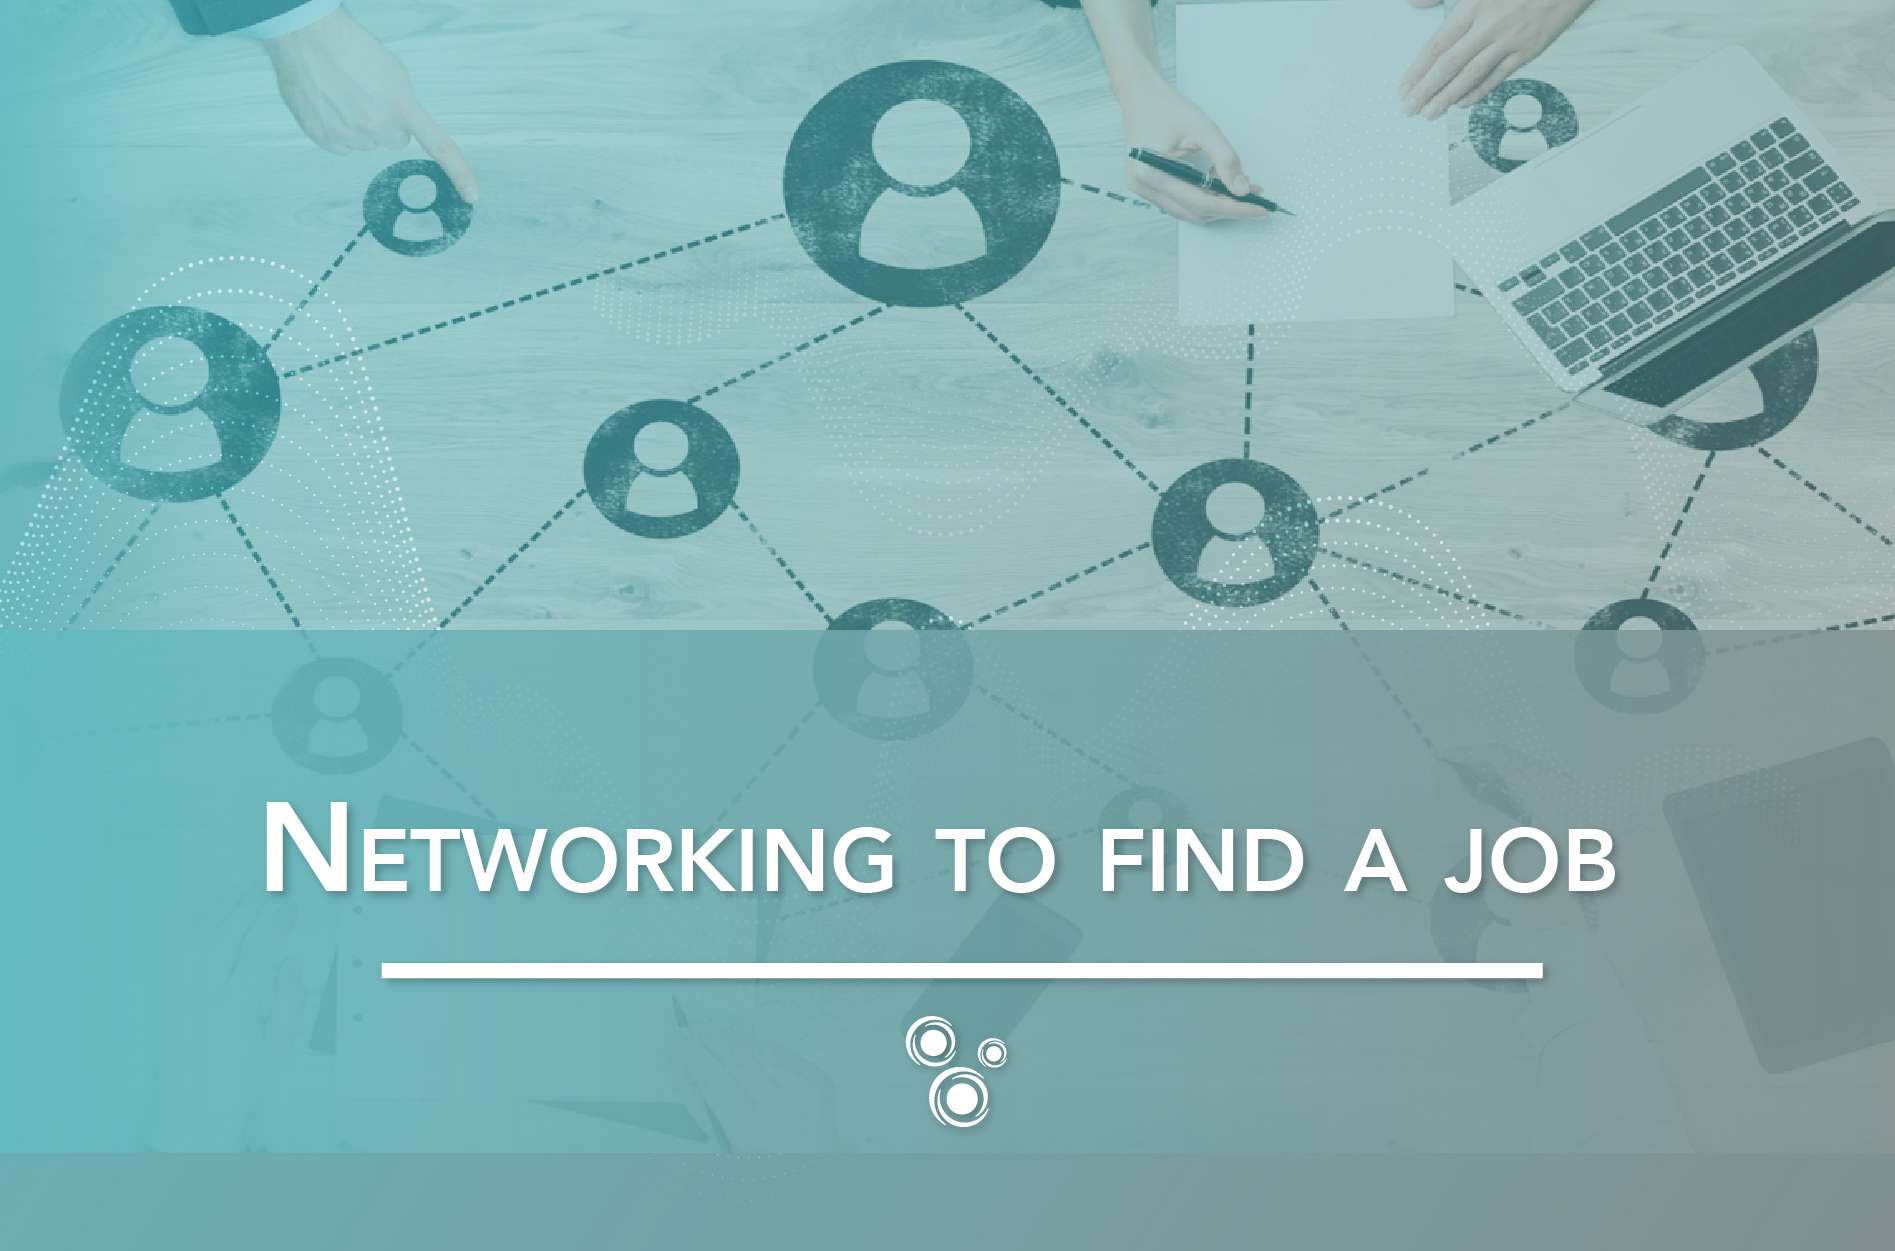 Networking to find a job